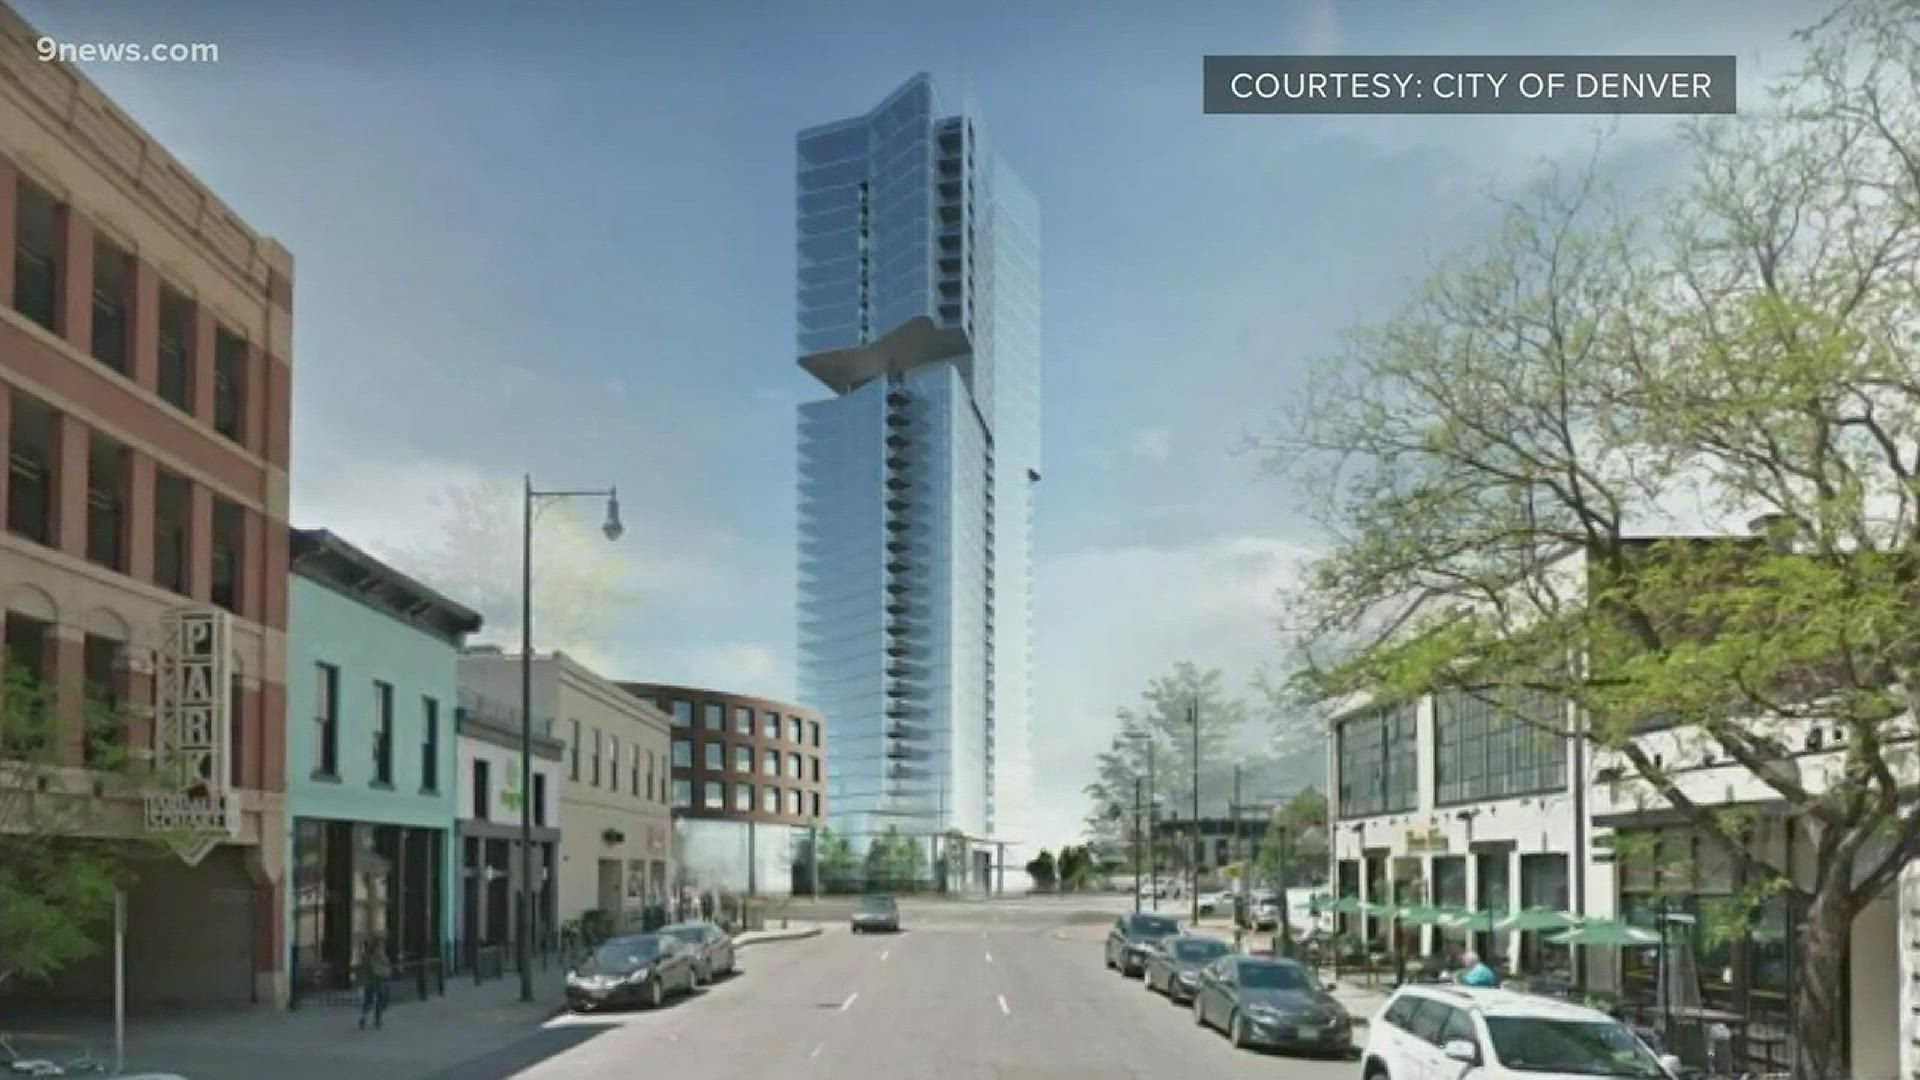 The proposal design, which is only in its initial stages and has not yet been approved, includes plans for a residential tower, as well as a 5-story office building at the site.